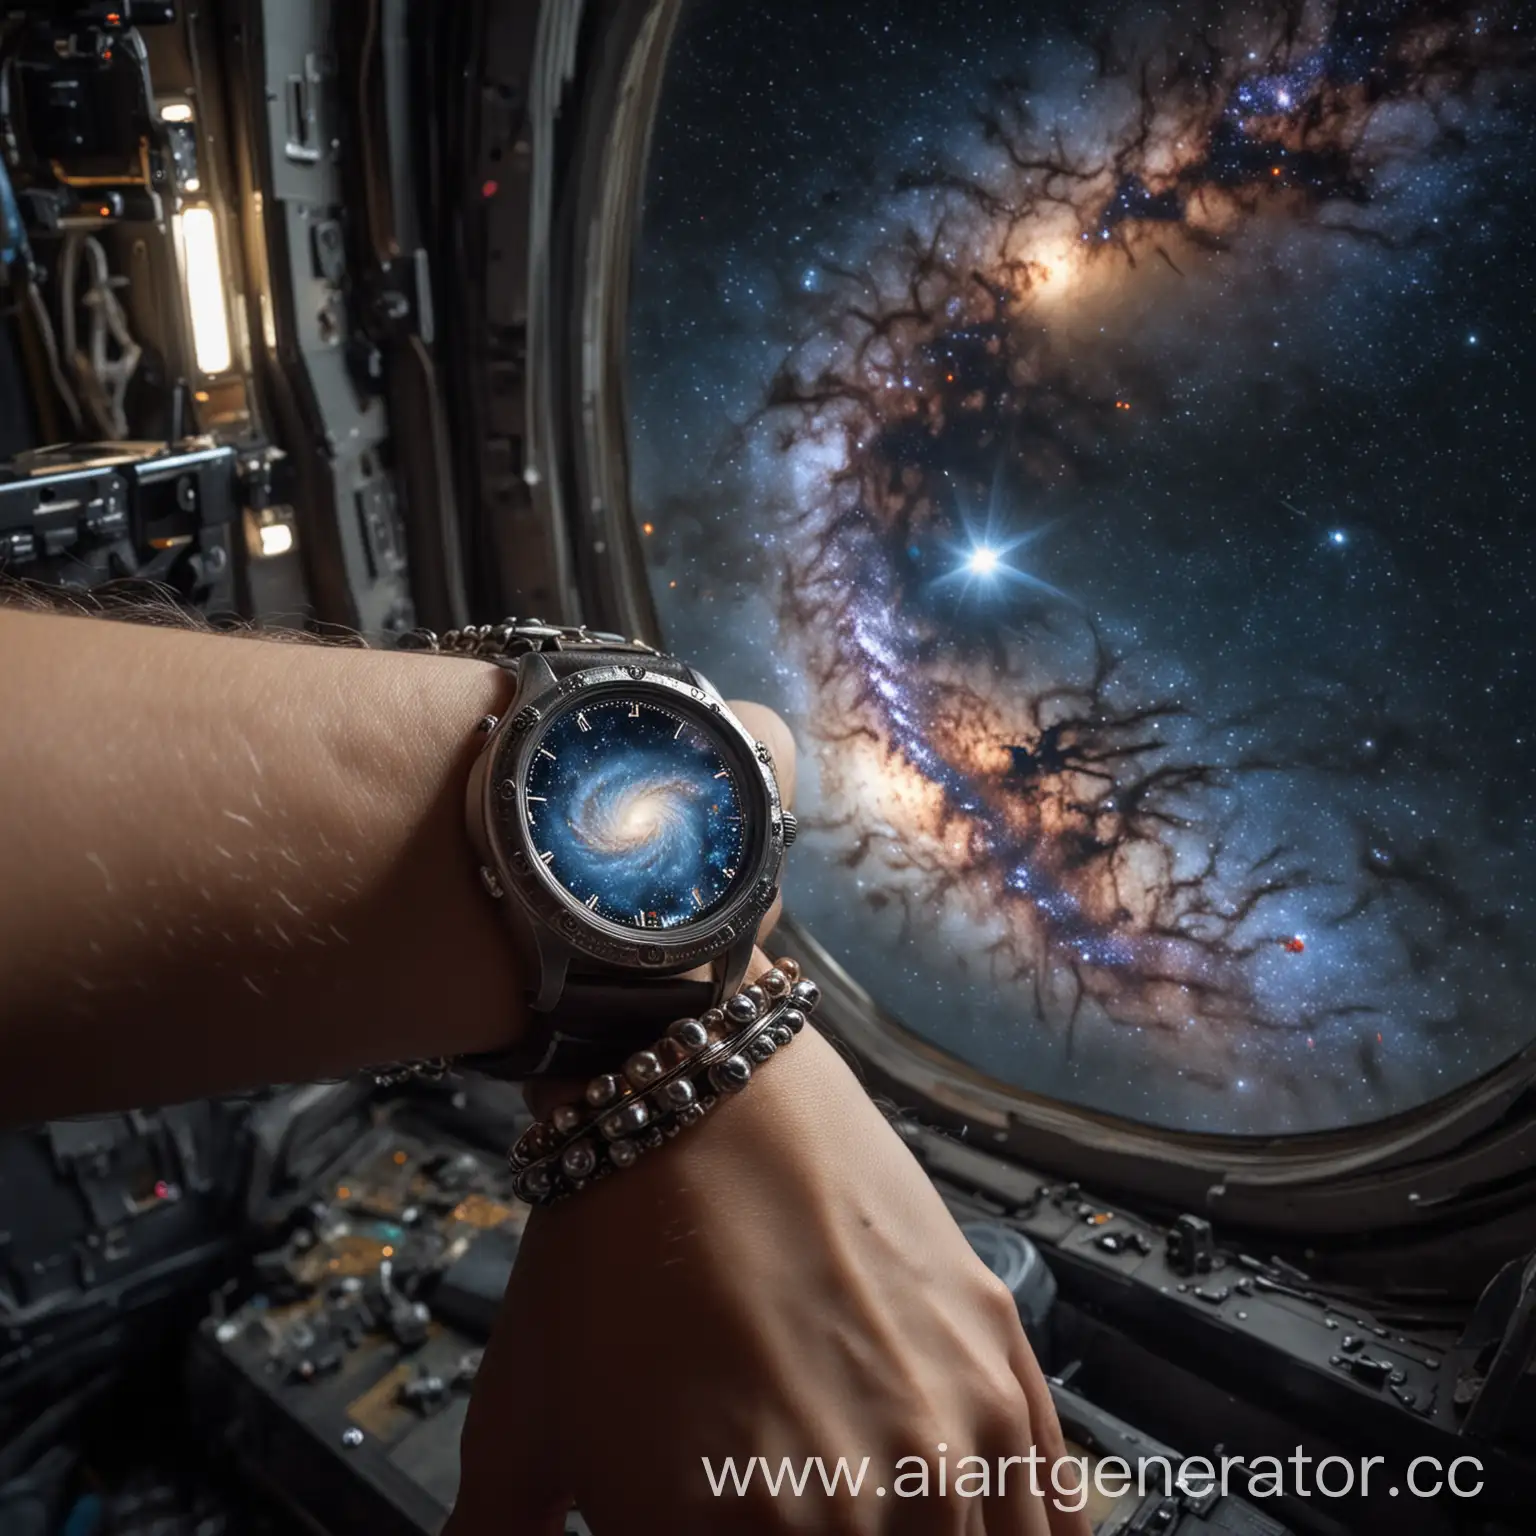 Galaxy-Spiral-on-Girls-Bracelet-Captivating-Space-Journey-View